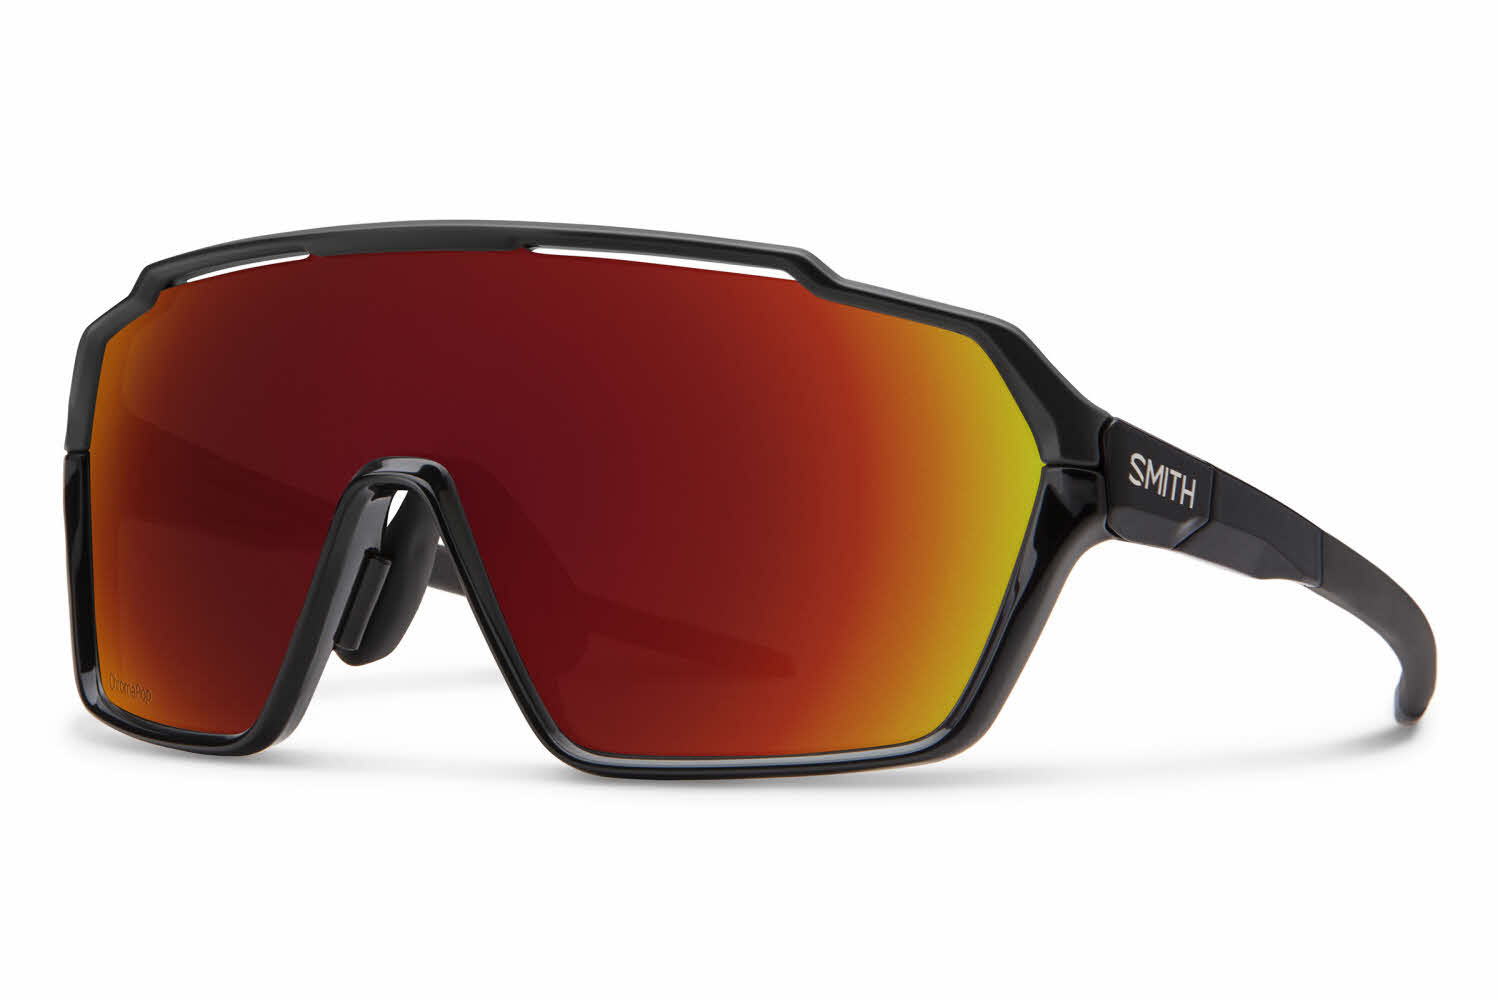 Smith Sunglasses South Africa: Buy Online - Oculux